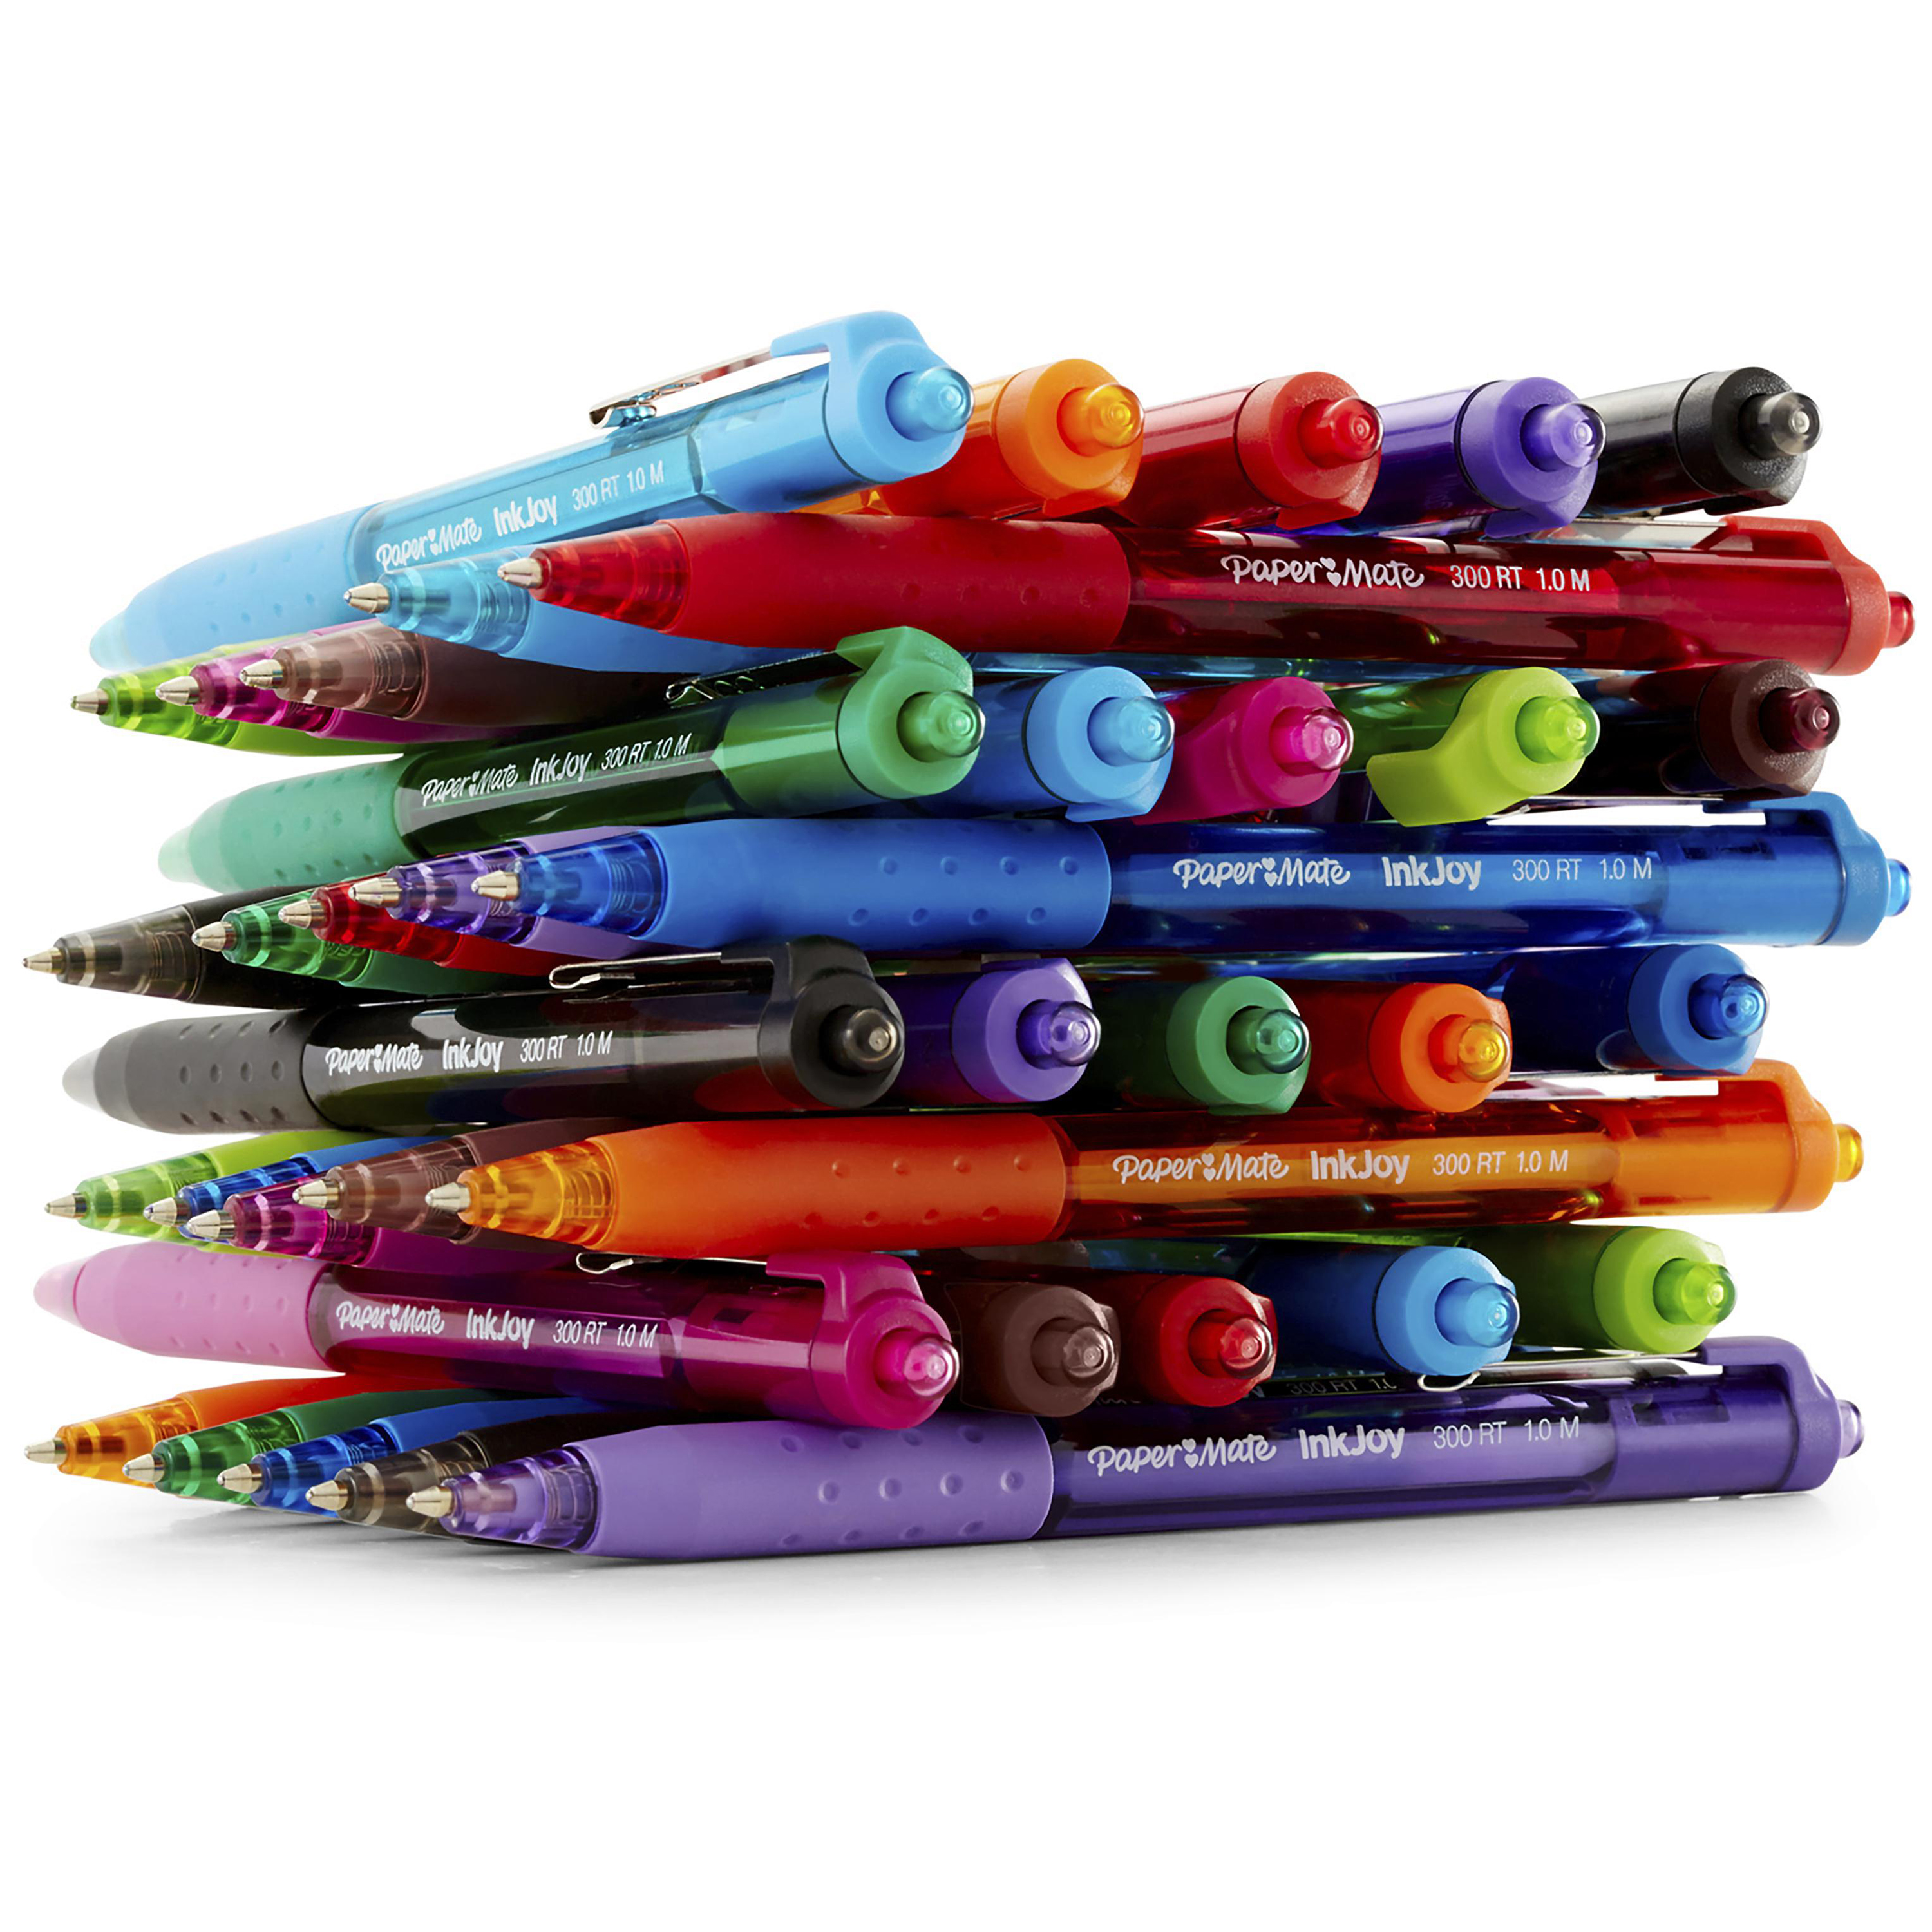 Paper Mate InkJoy Retractable Ballpoint Pen, 1.0 mm, Assorted Colors, 8 Count - image 5 of 8